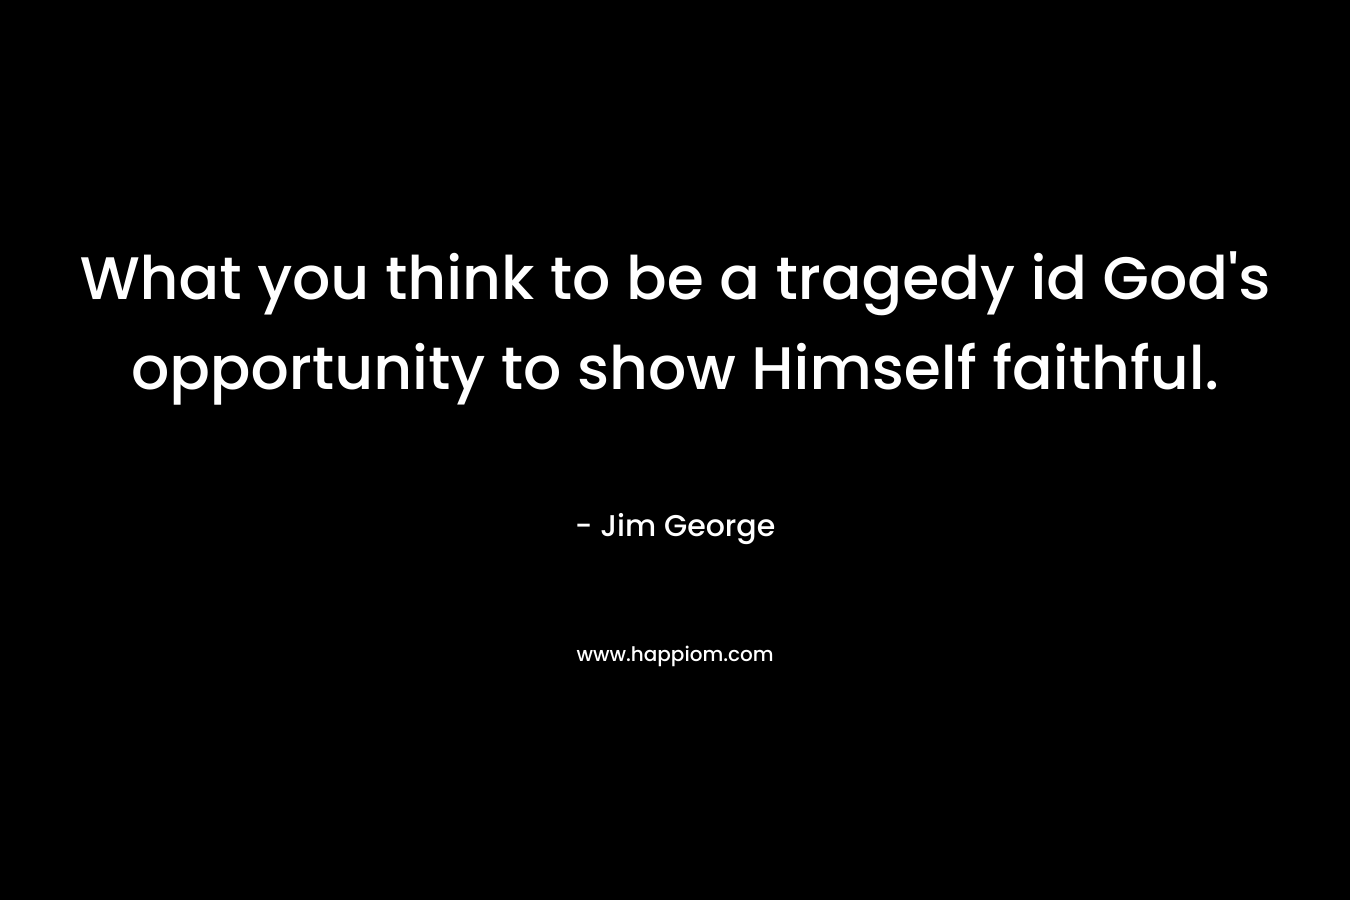 What you think to be a tragedy id God's opportunity to show Himself faithful.